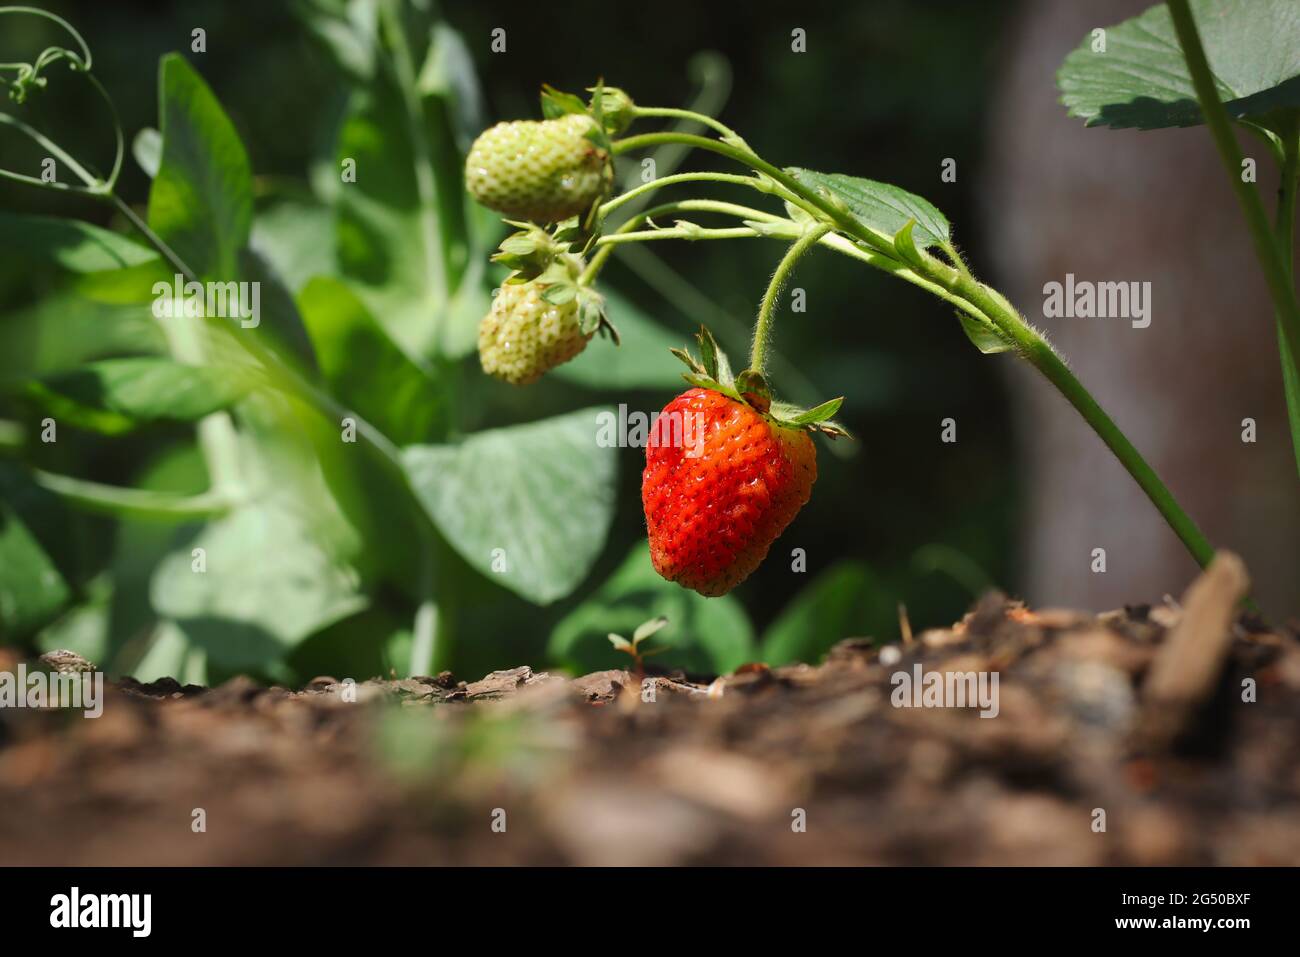 Red Strawberry Plant Growing in Garden. Growth of Ripe Fragaria Outside during Sunny Day. Stock Photo